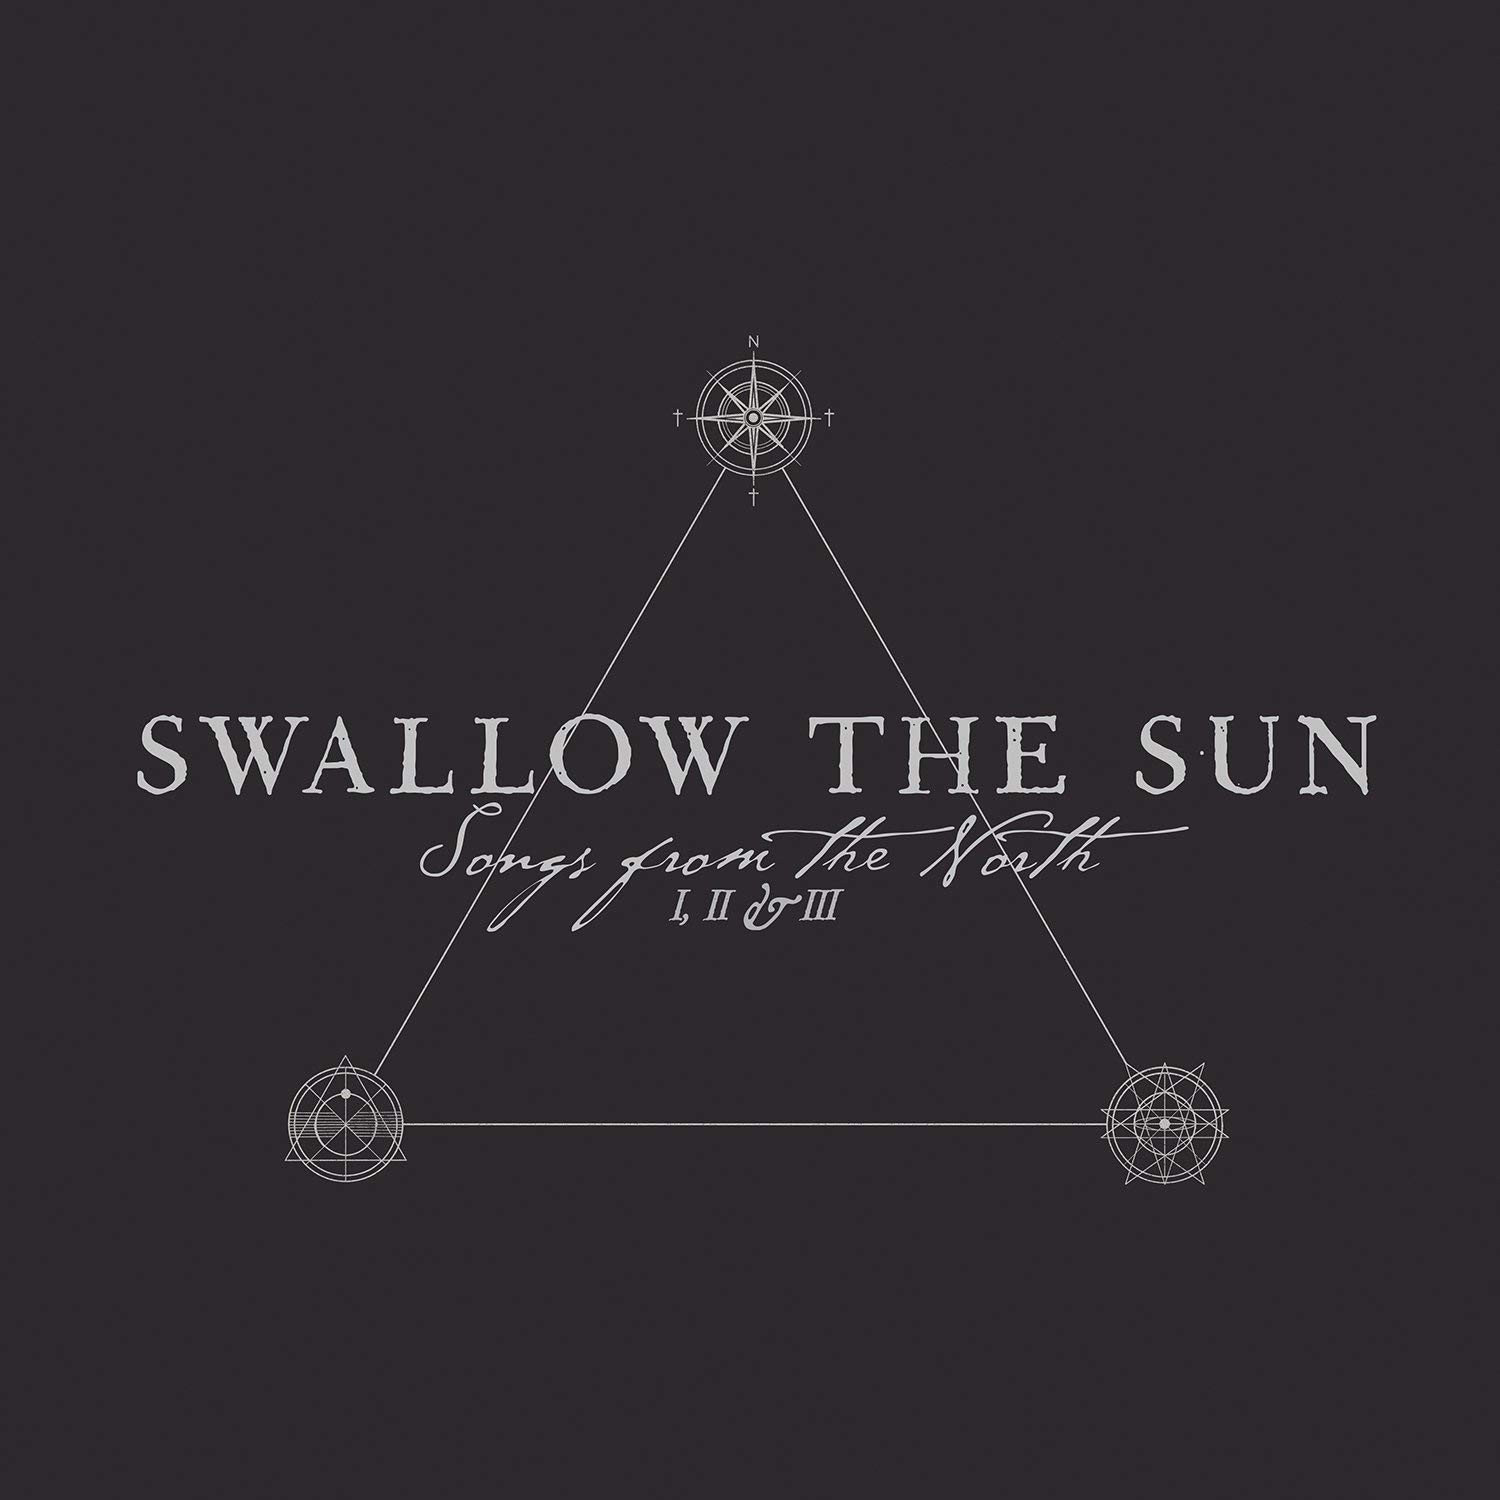 Vinyl Record Swallow The Sun Songs From the North I, II & III (5 LP)